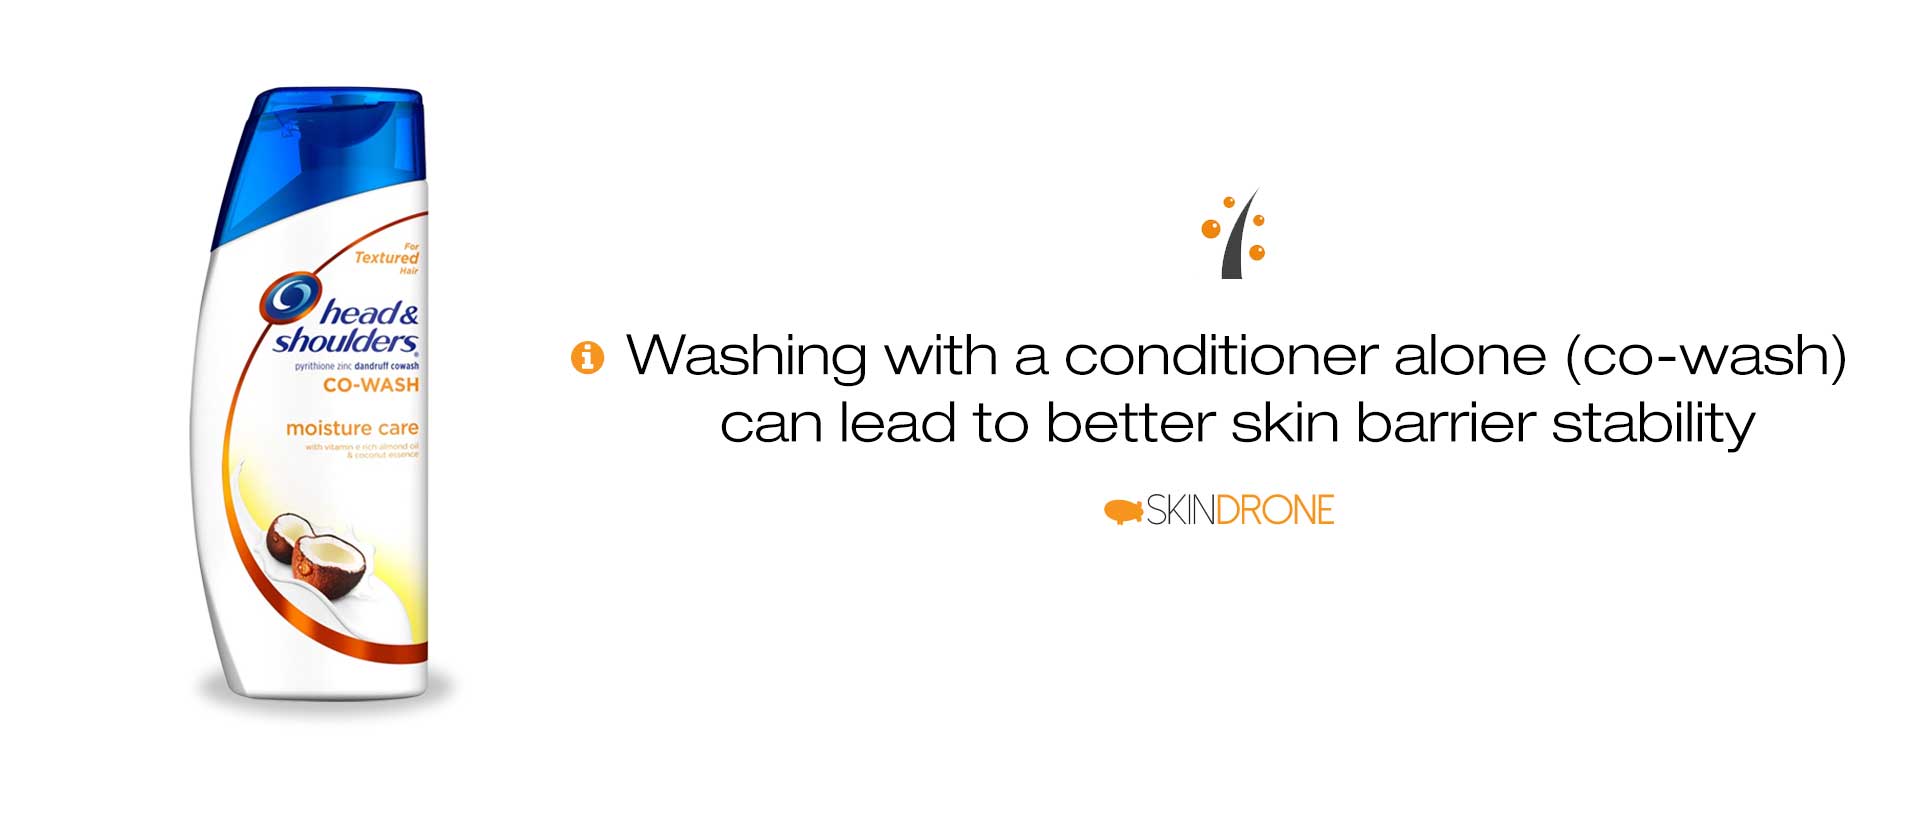 Switching to the conditioner washing (co-wash) method pay further stabilize barrier function and lead to more lasting symptom relief